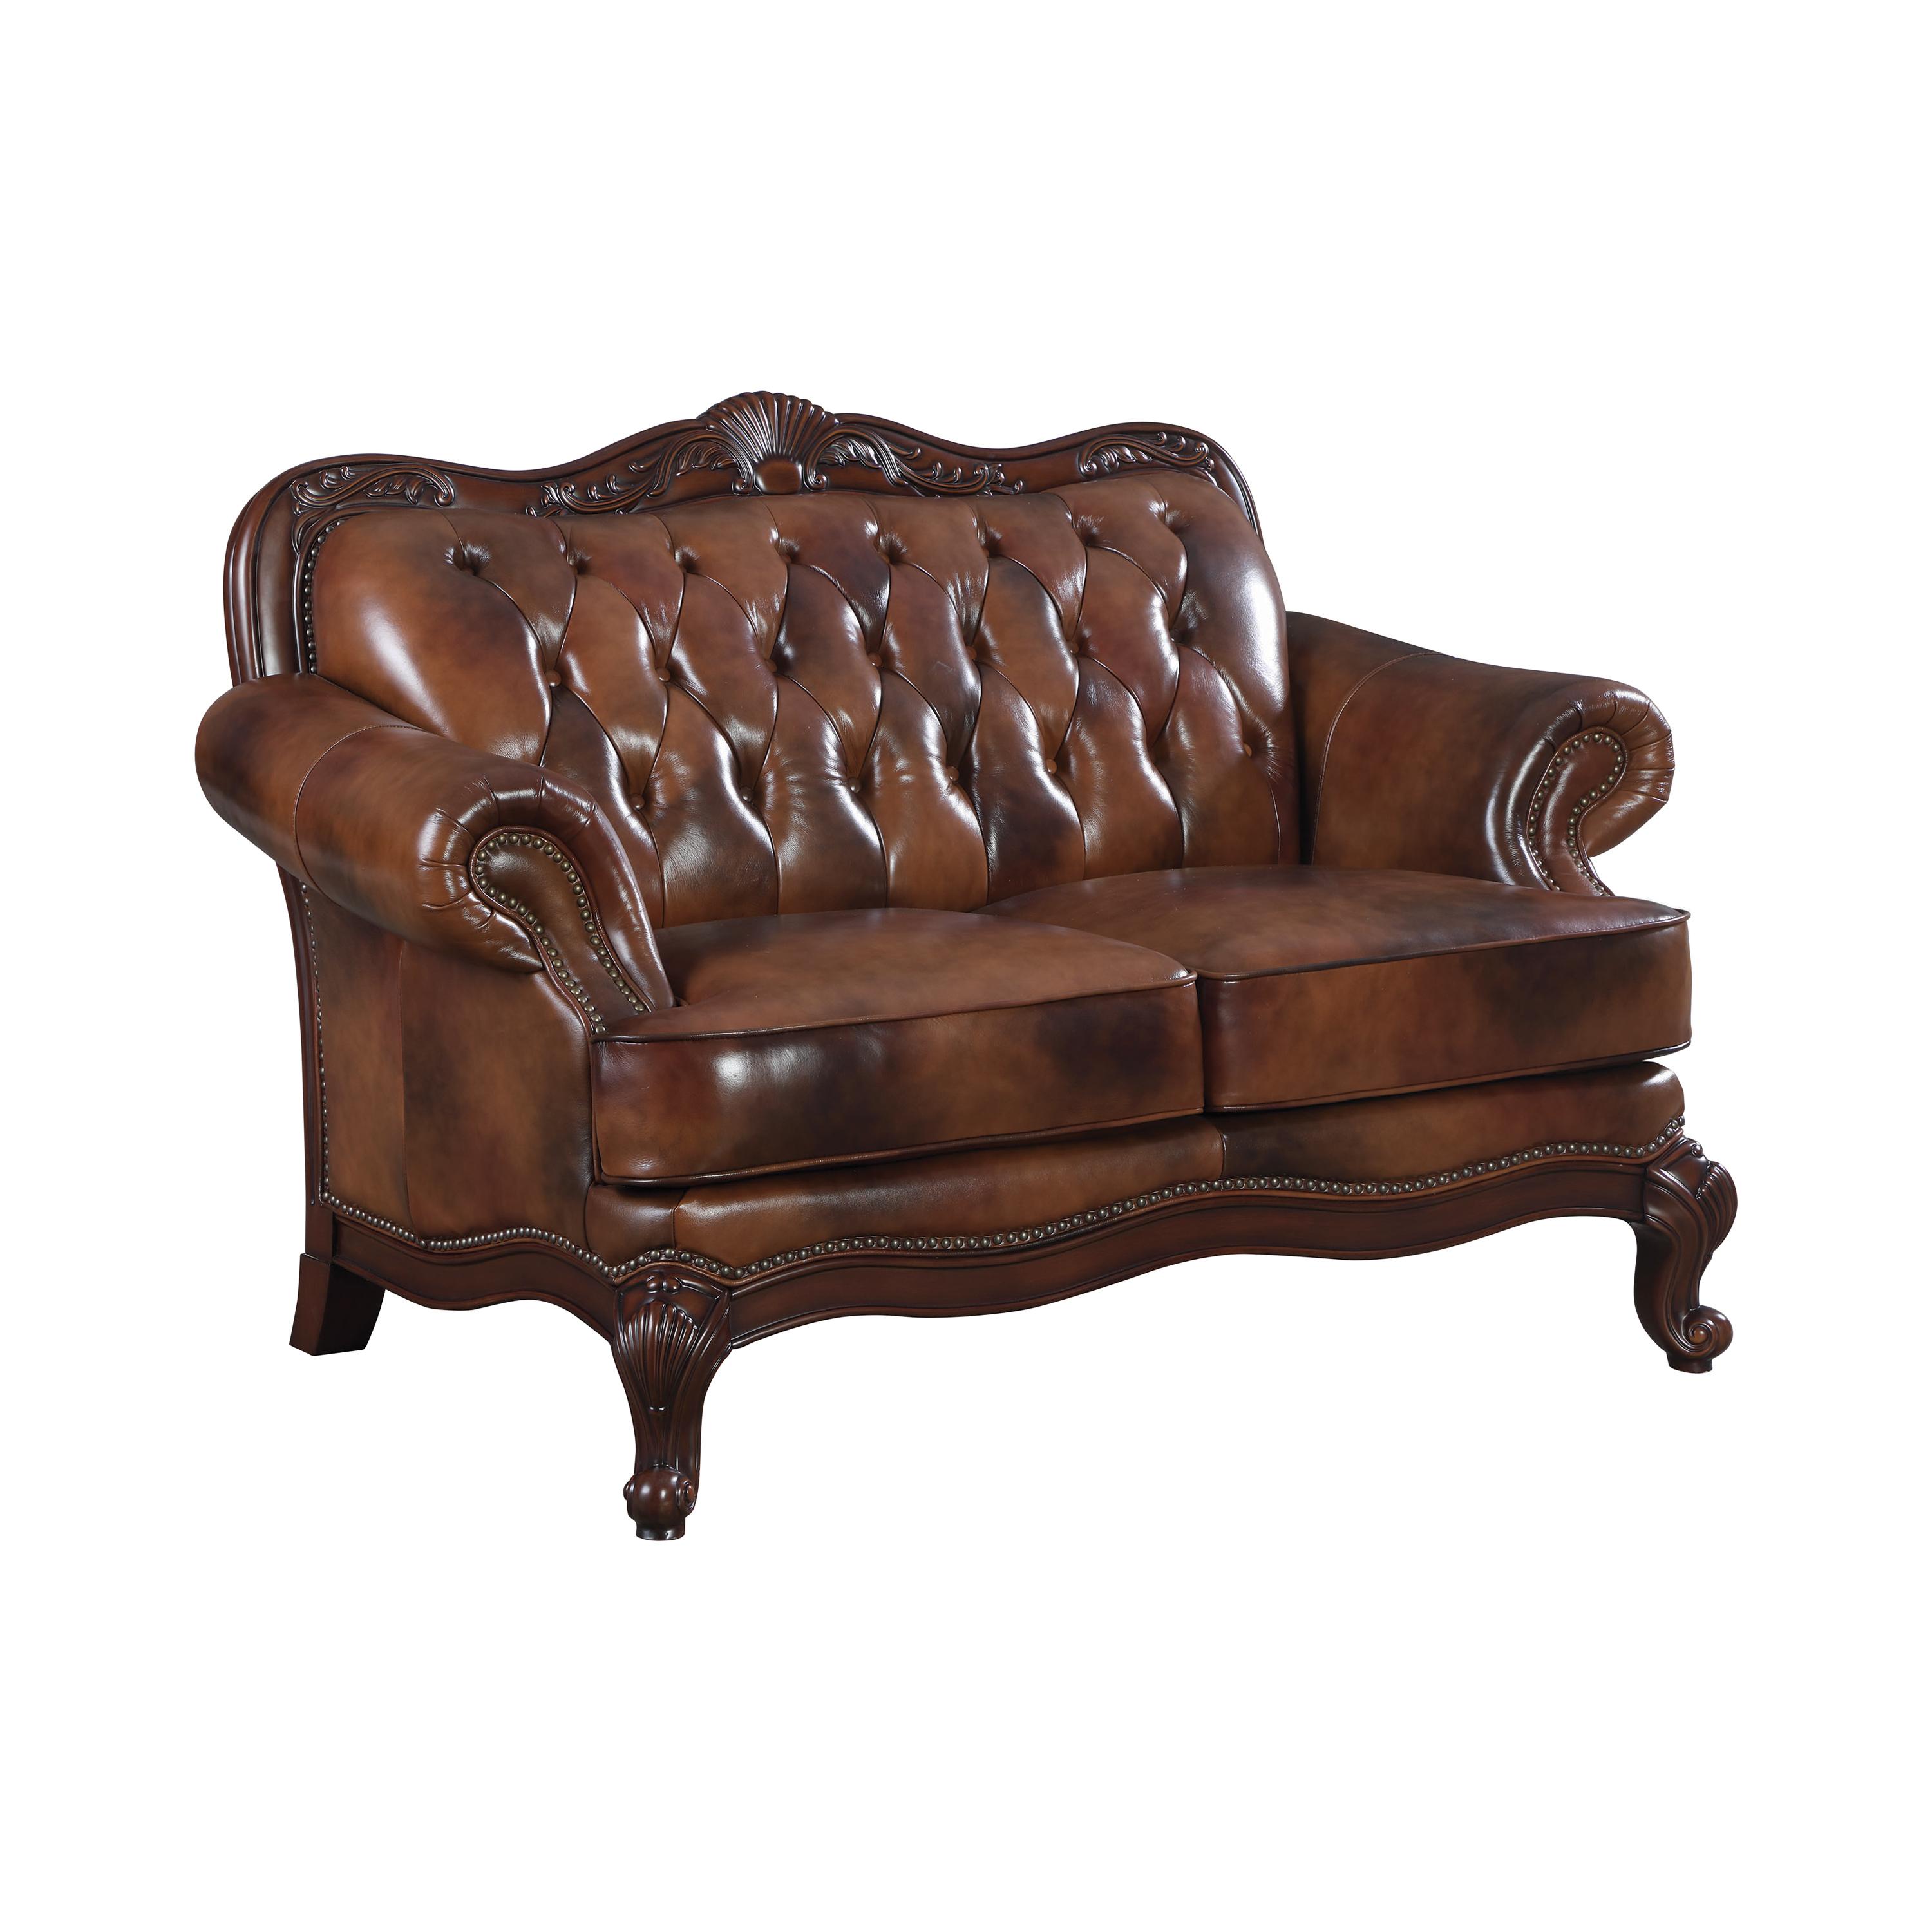 Classic Loveseat 500682 Victoria 500682 in Brown Leather